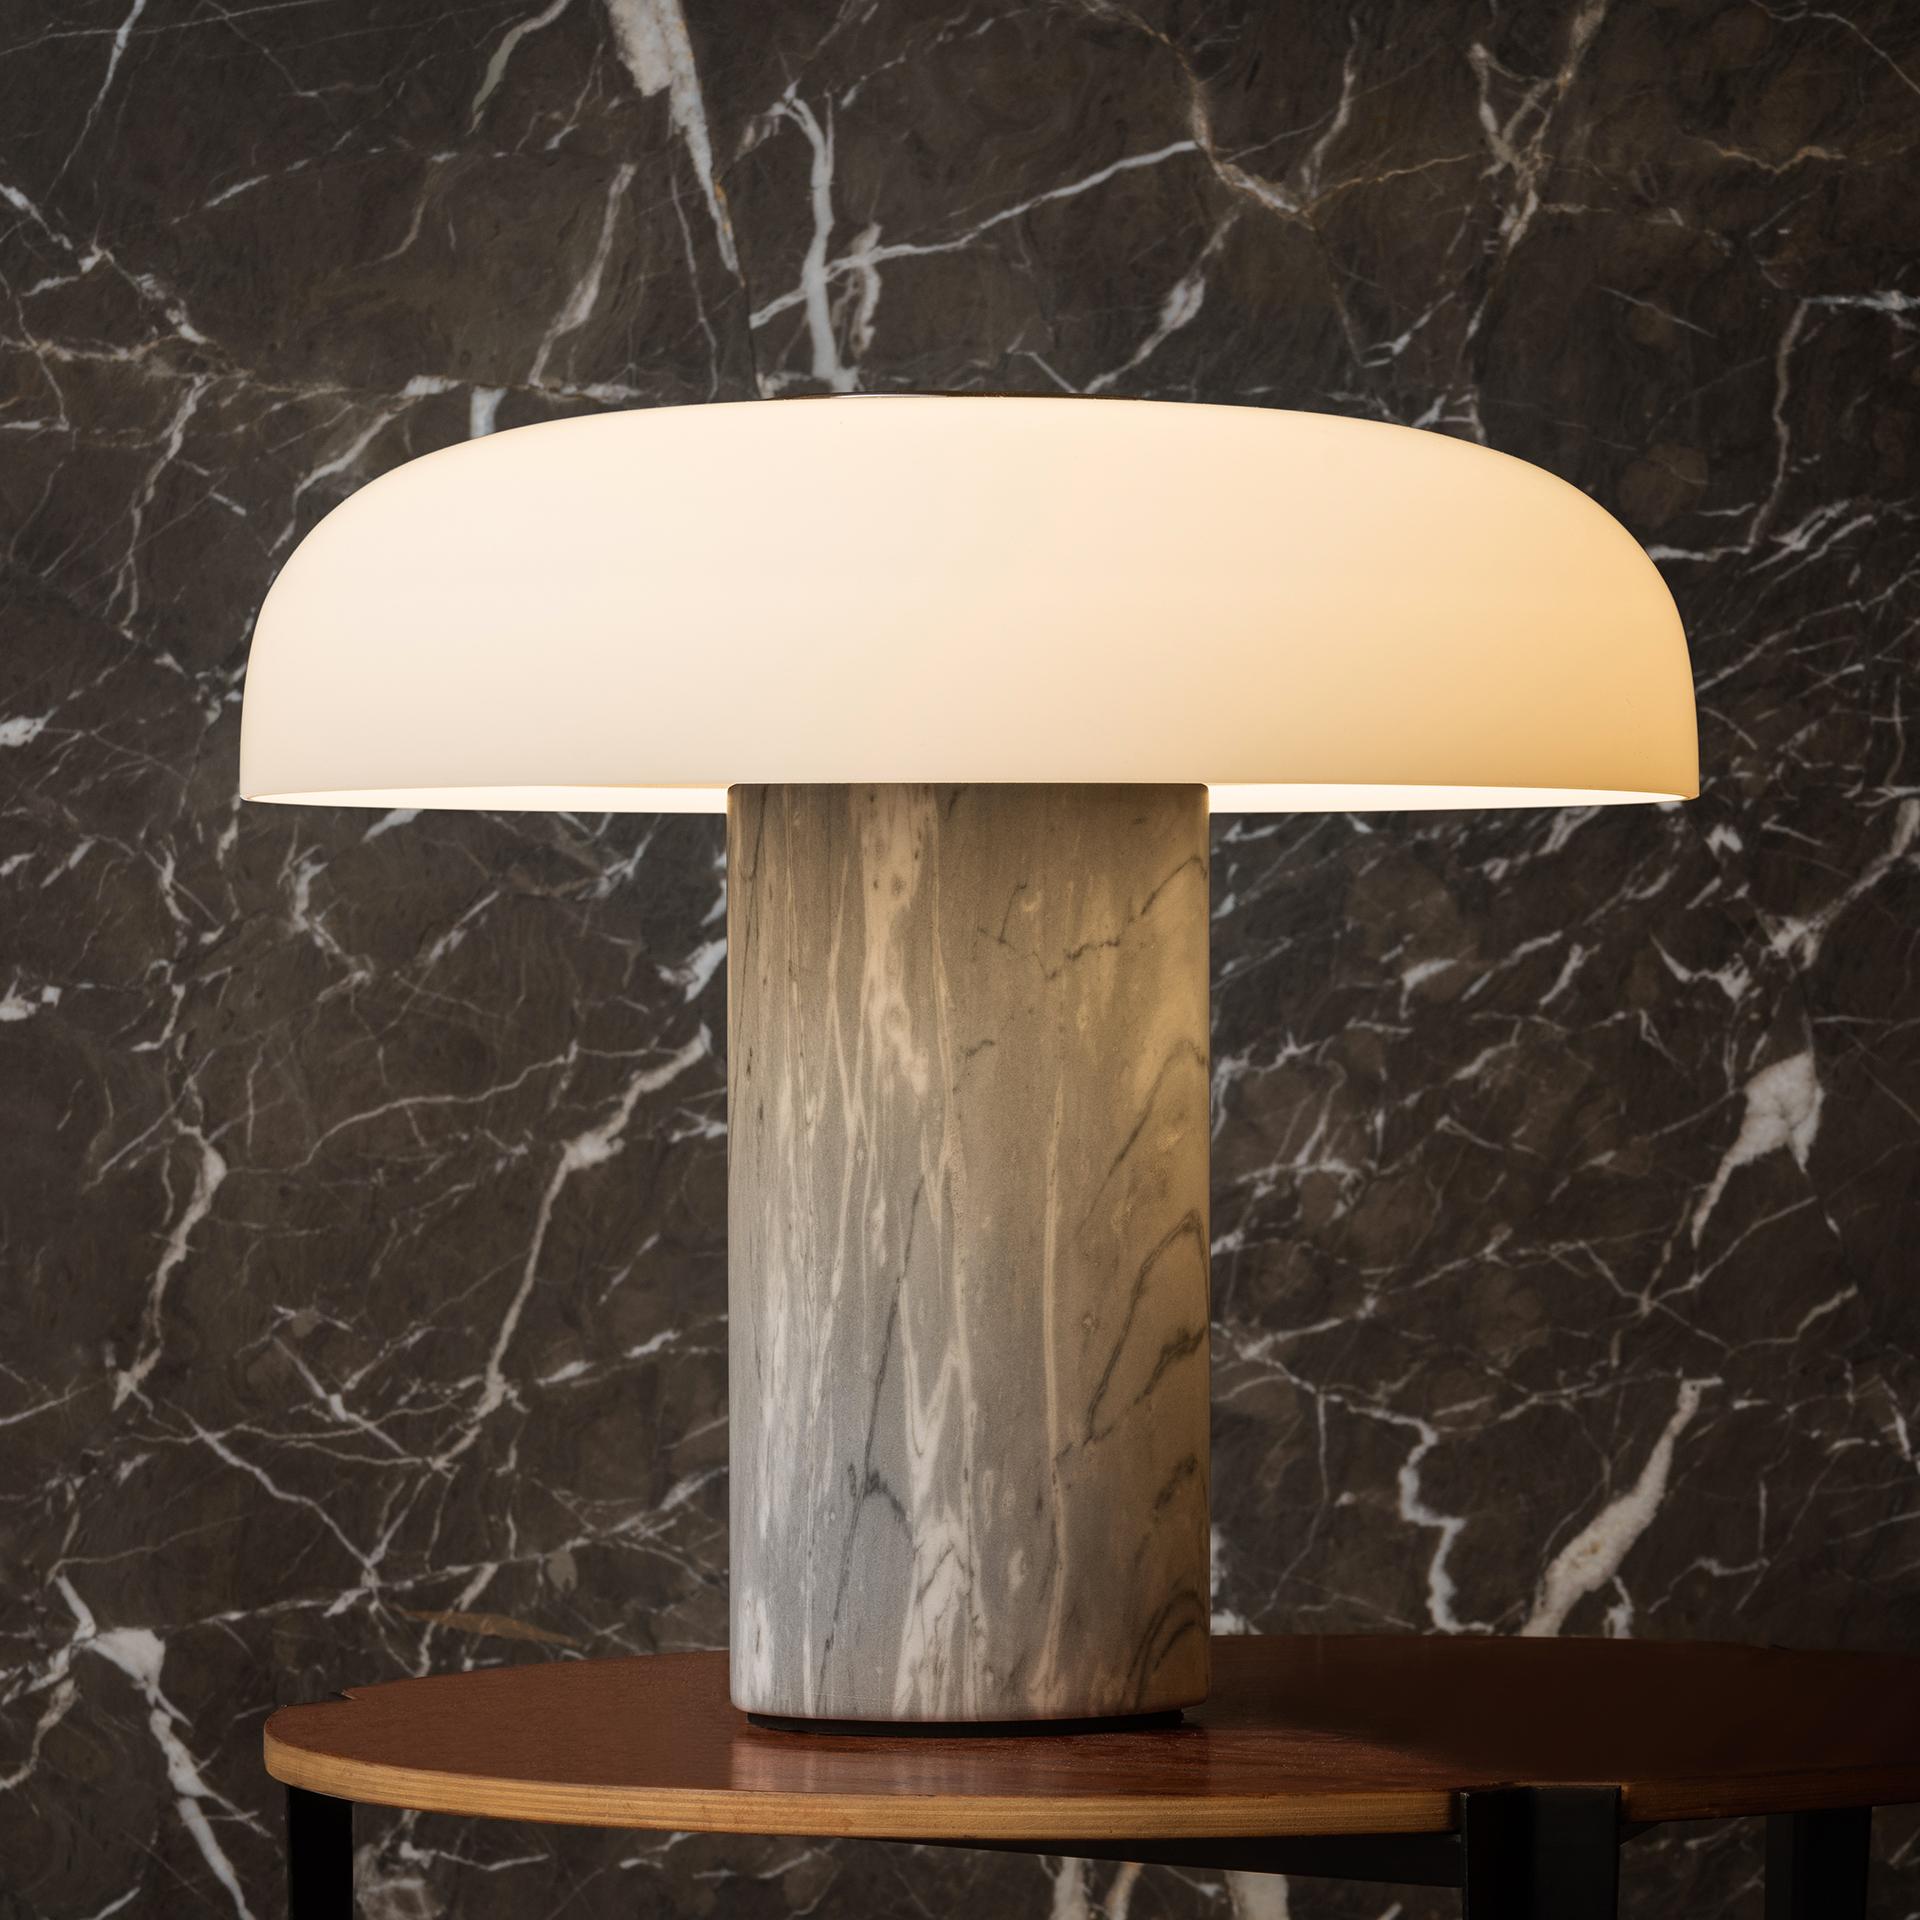 Large Fontana Arte 'Tropico' gray marble & glass table lamp by Studio Buratti. Executed in high quality marble, thick etched hand blown opaline glass and galvanized glossy black metal. The 